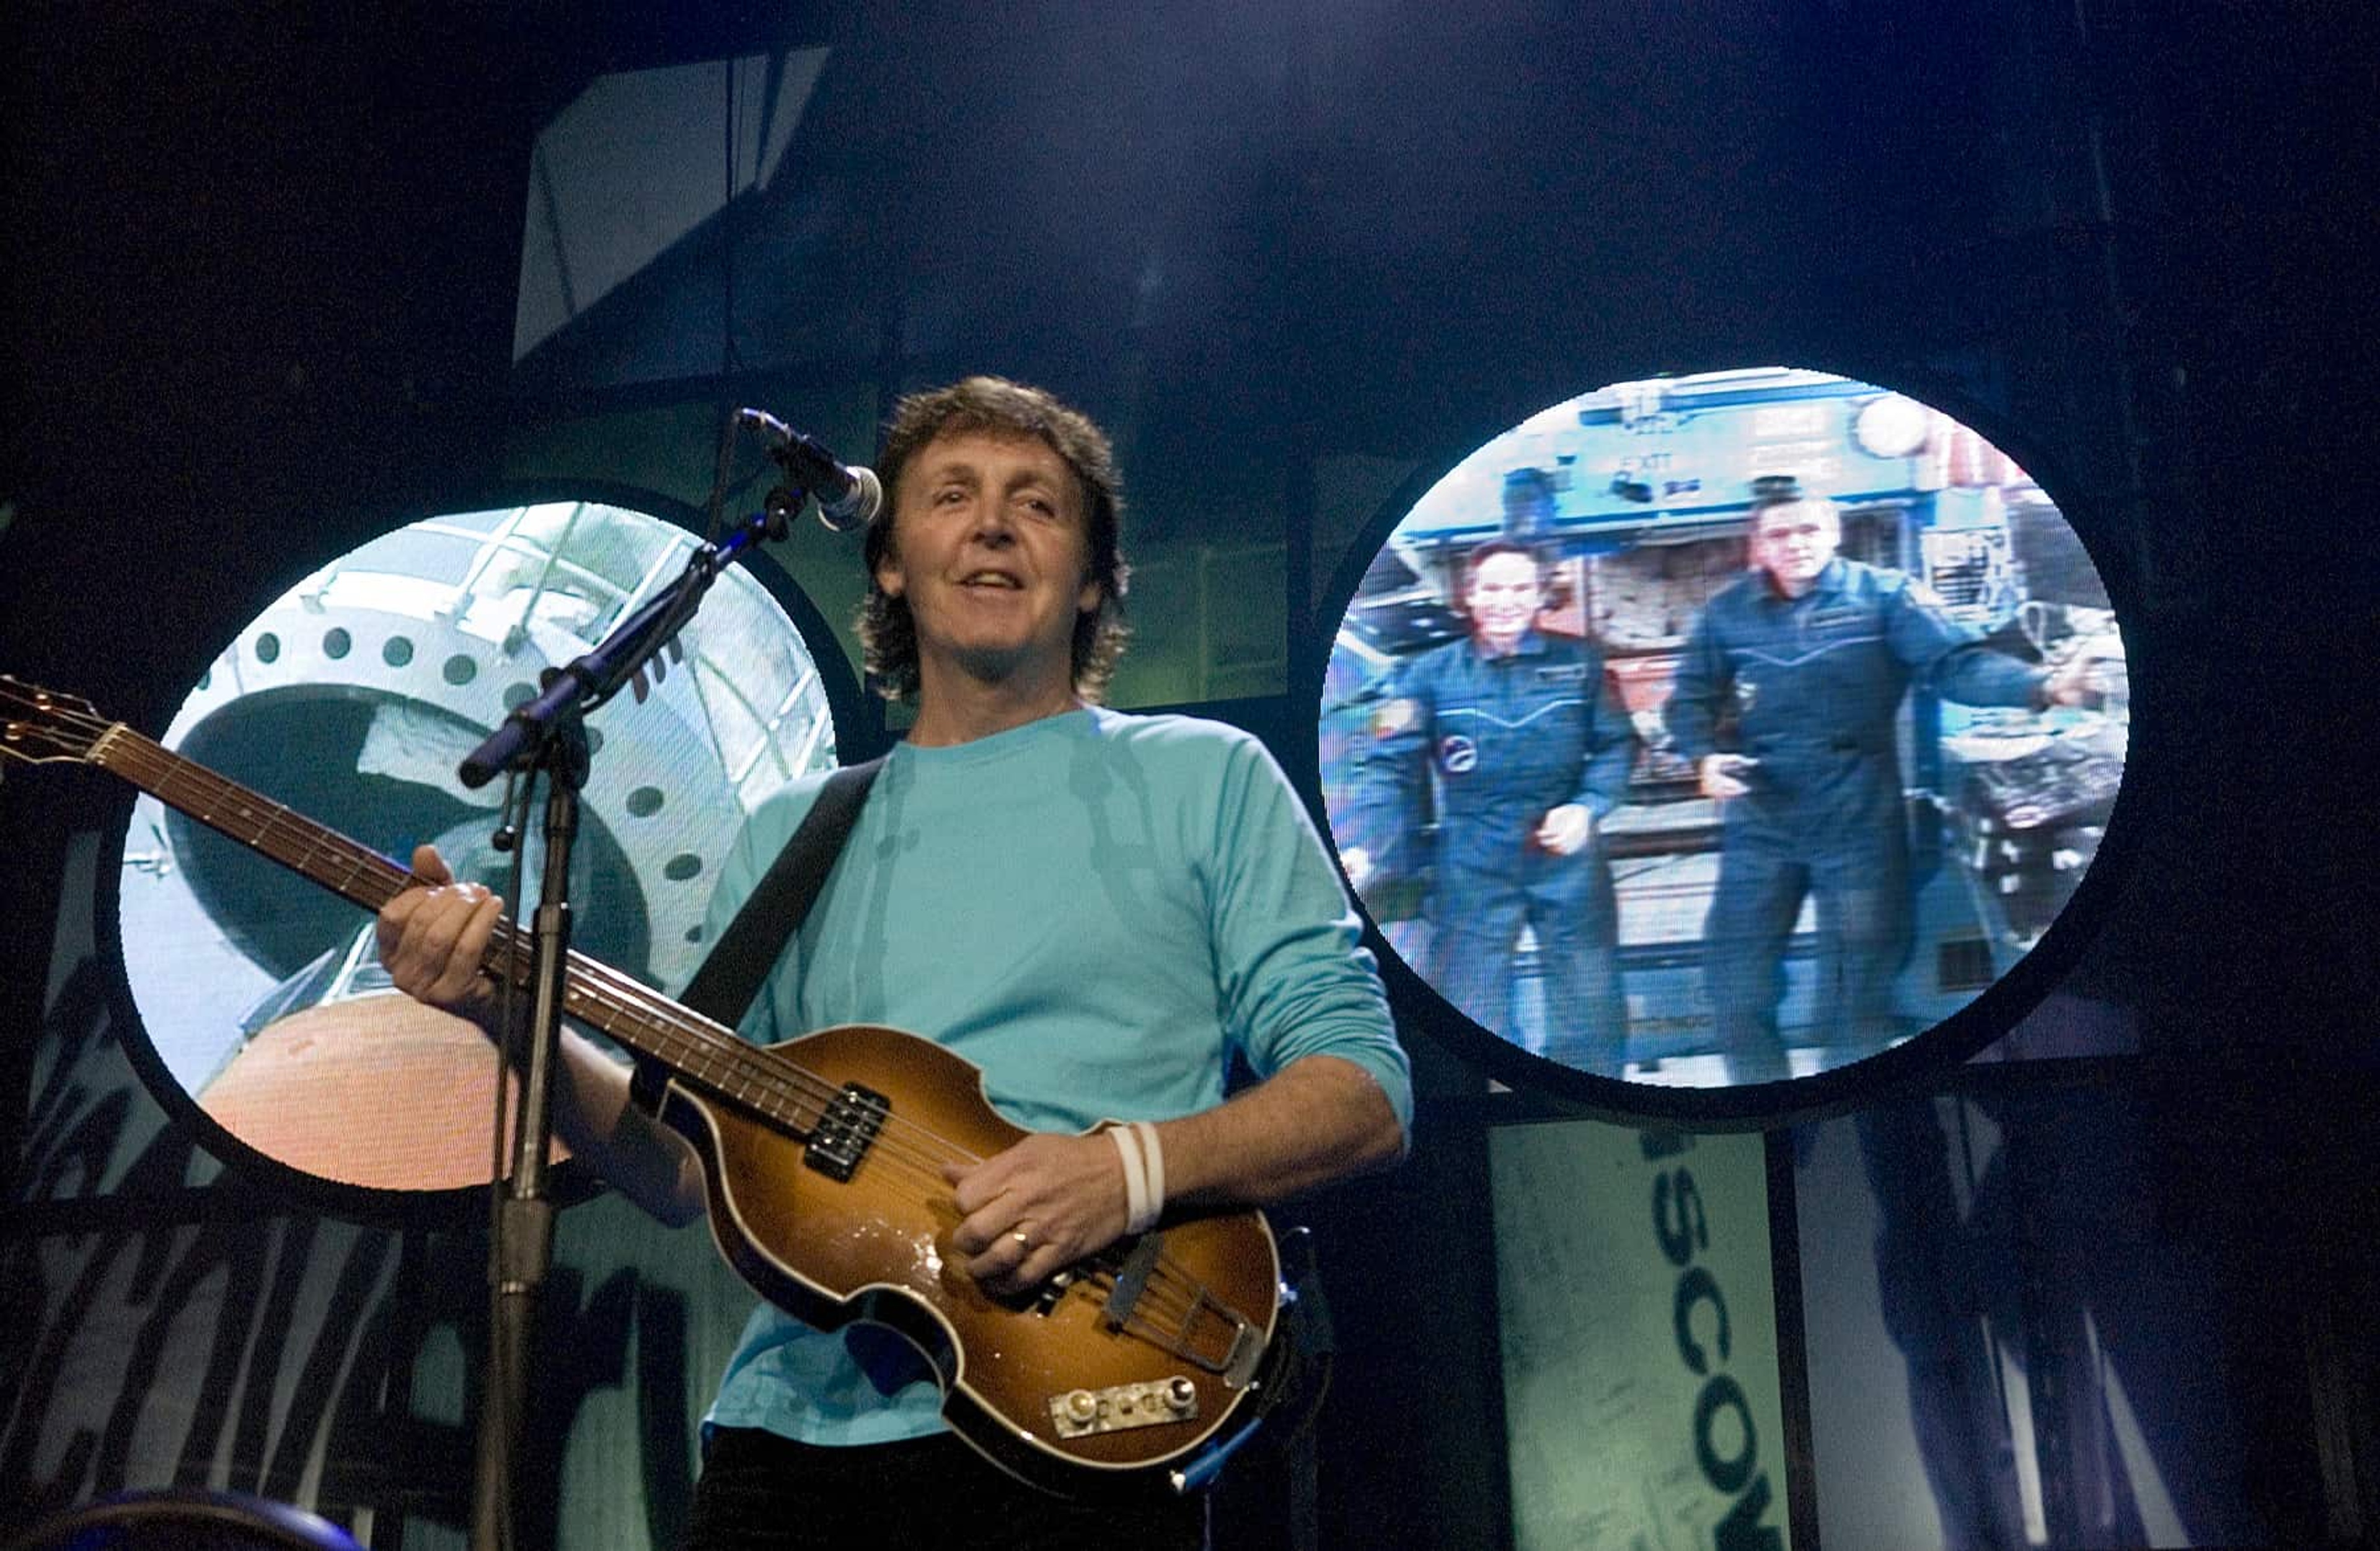 Paul on stage holding a guitar, with astronauts on a screen behind him